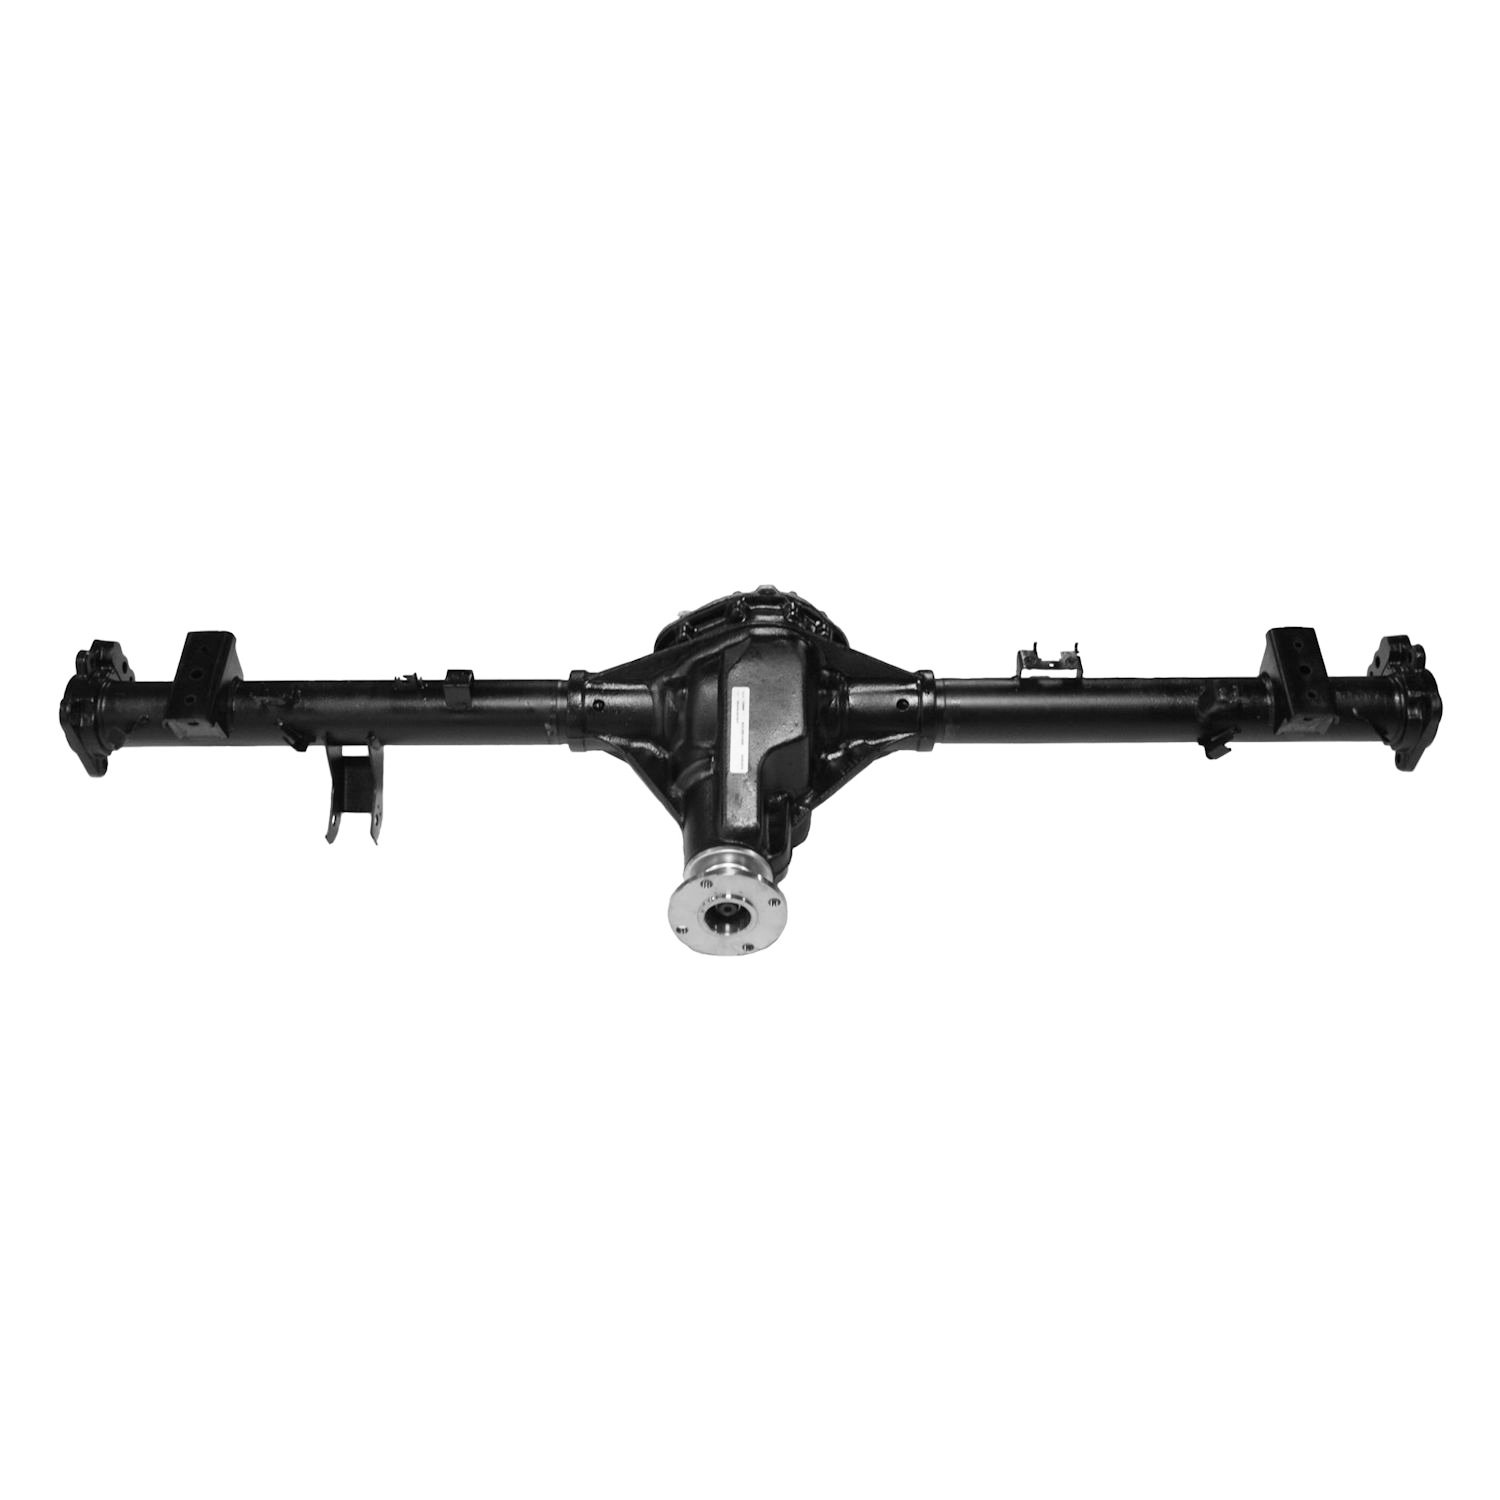 Remanufactured Dana 44 Axle Assembly for 08-15 Nissan Titan, 4x4 139.8" WB, 3.36, Posi